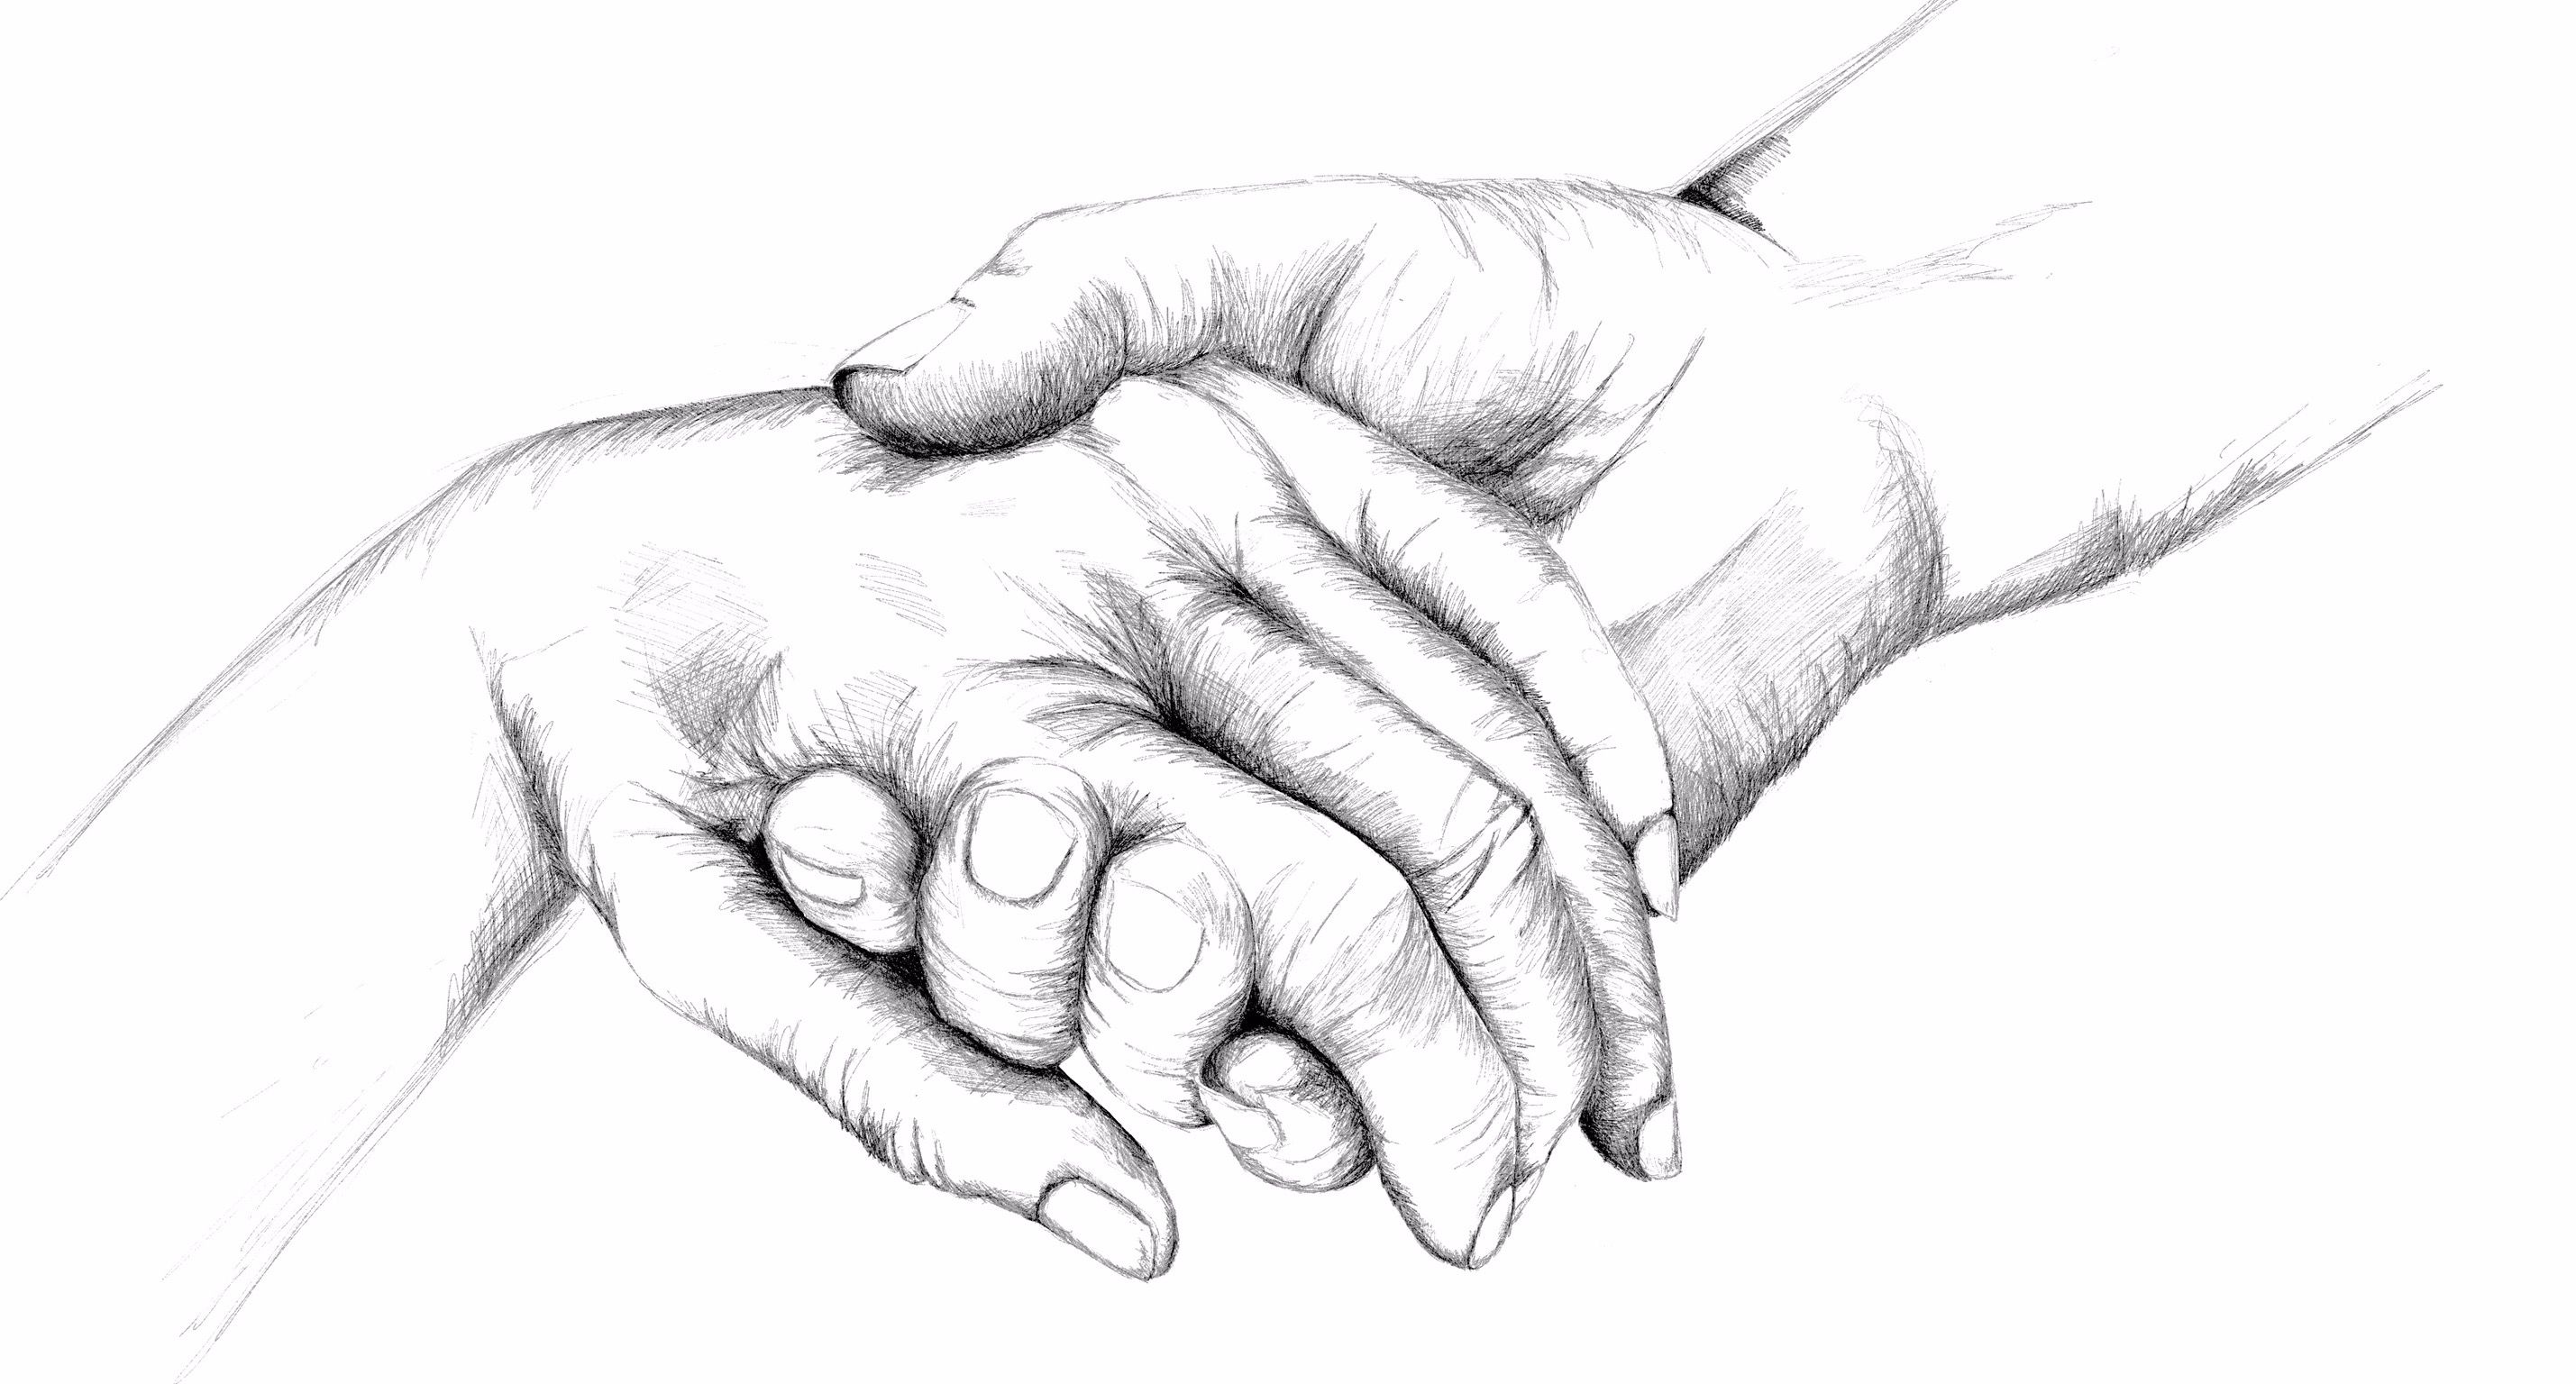 Helping Hands Sketch at Explore collection of